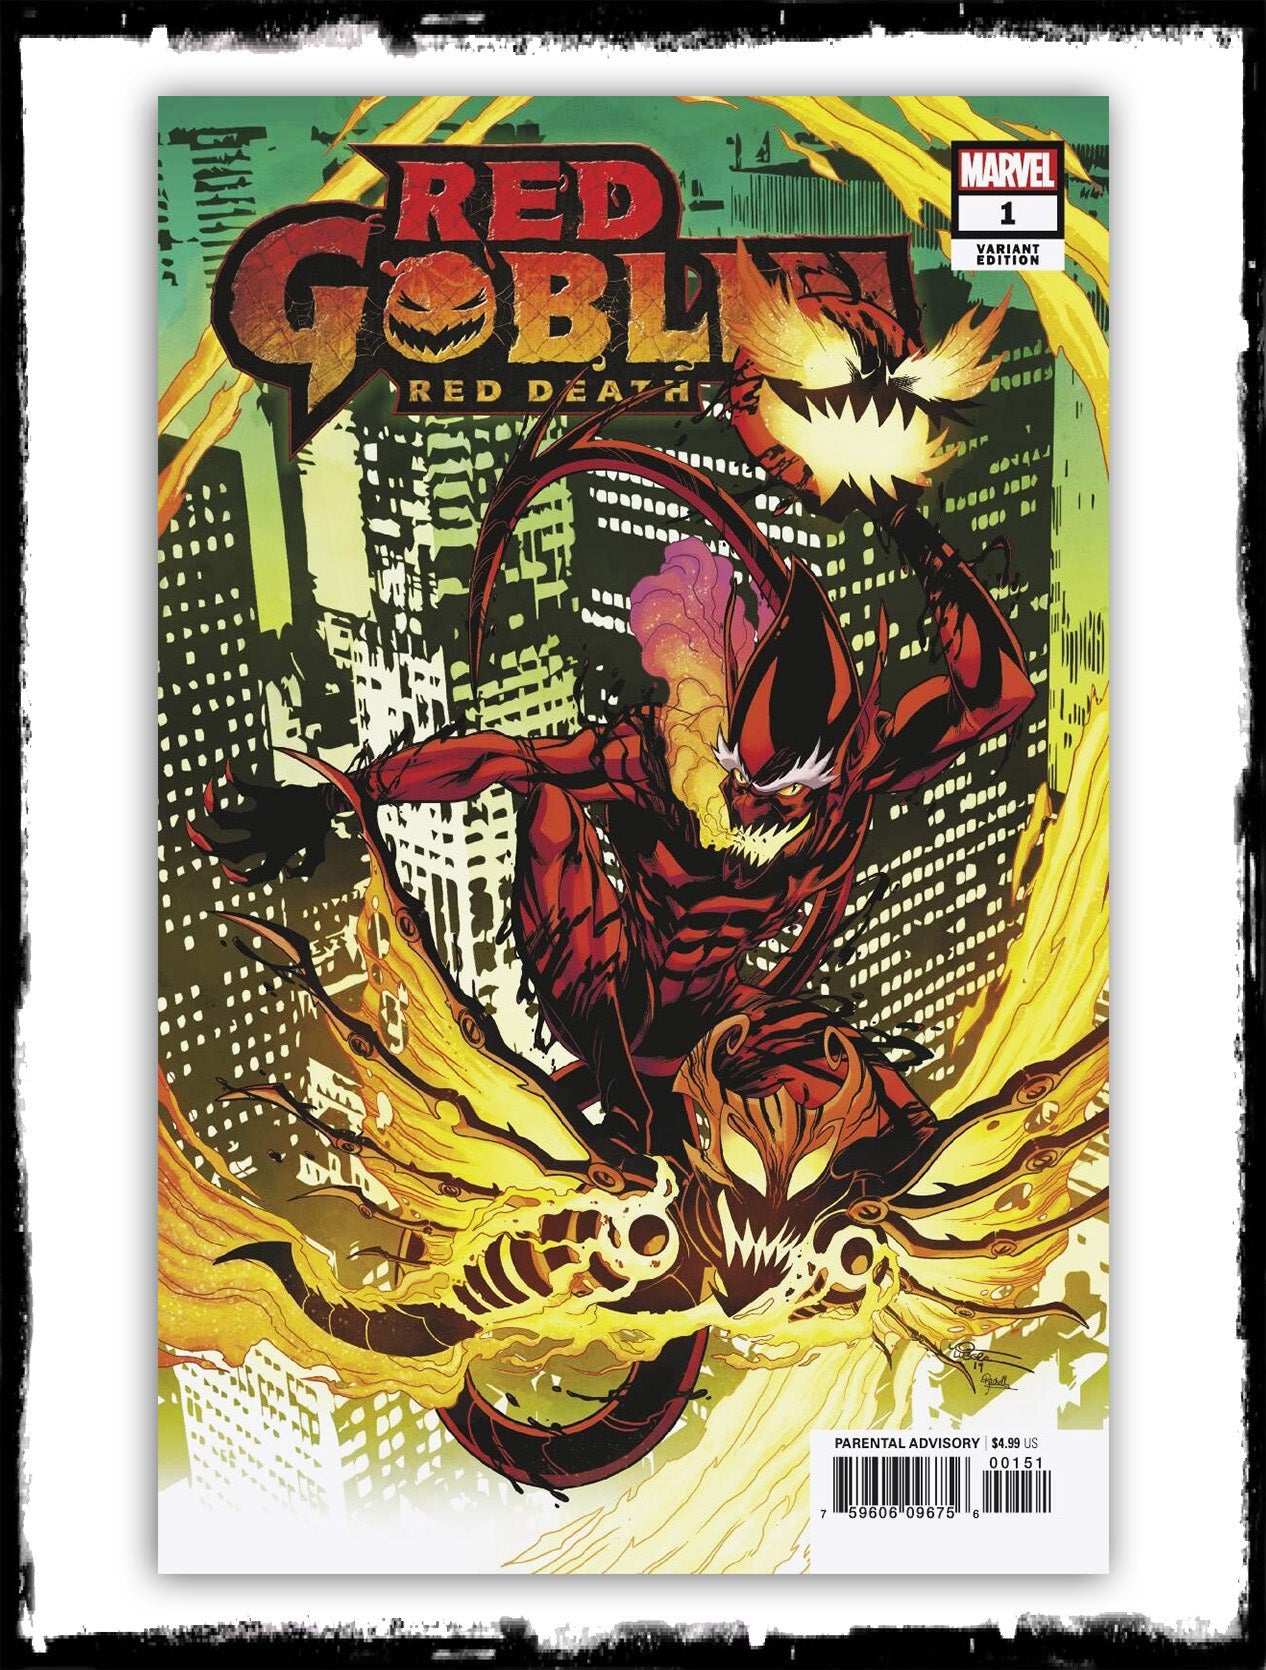 RED GOBLIN: RED DEATH - #1 LUBERA VARIANT (2019 - NM)